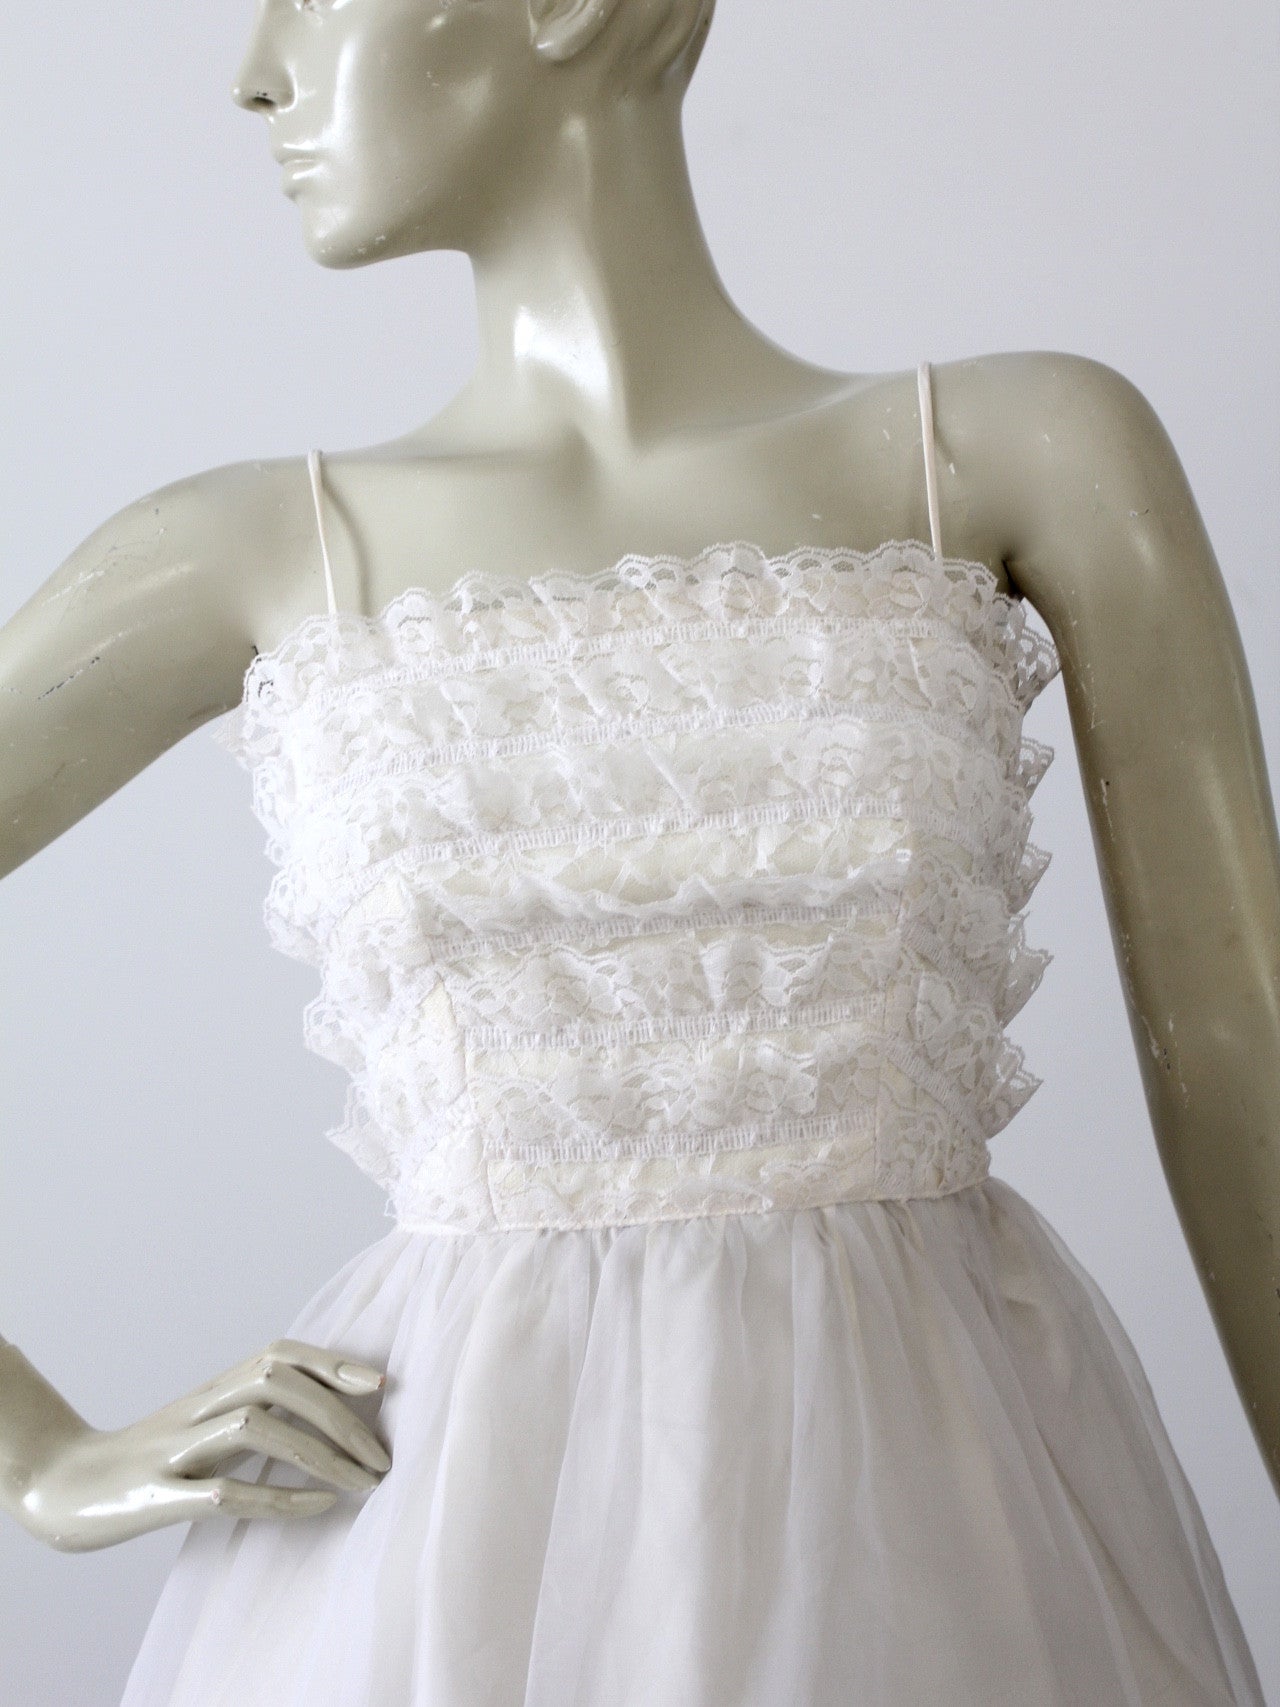 Saks Fifth Avenue, Dresses, Vintage Saks Fifth Avenue Couture Strapless  White Lace Mini Dress Flower Girl